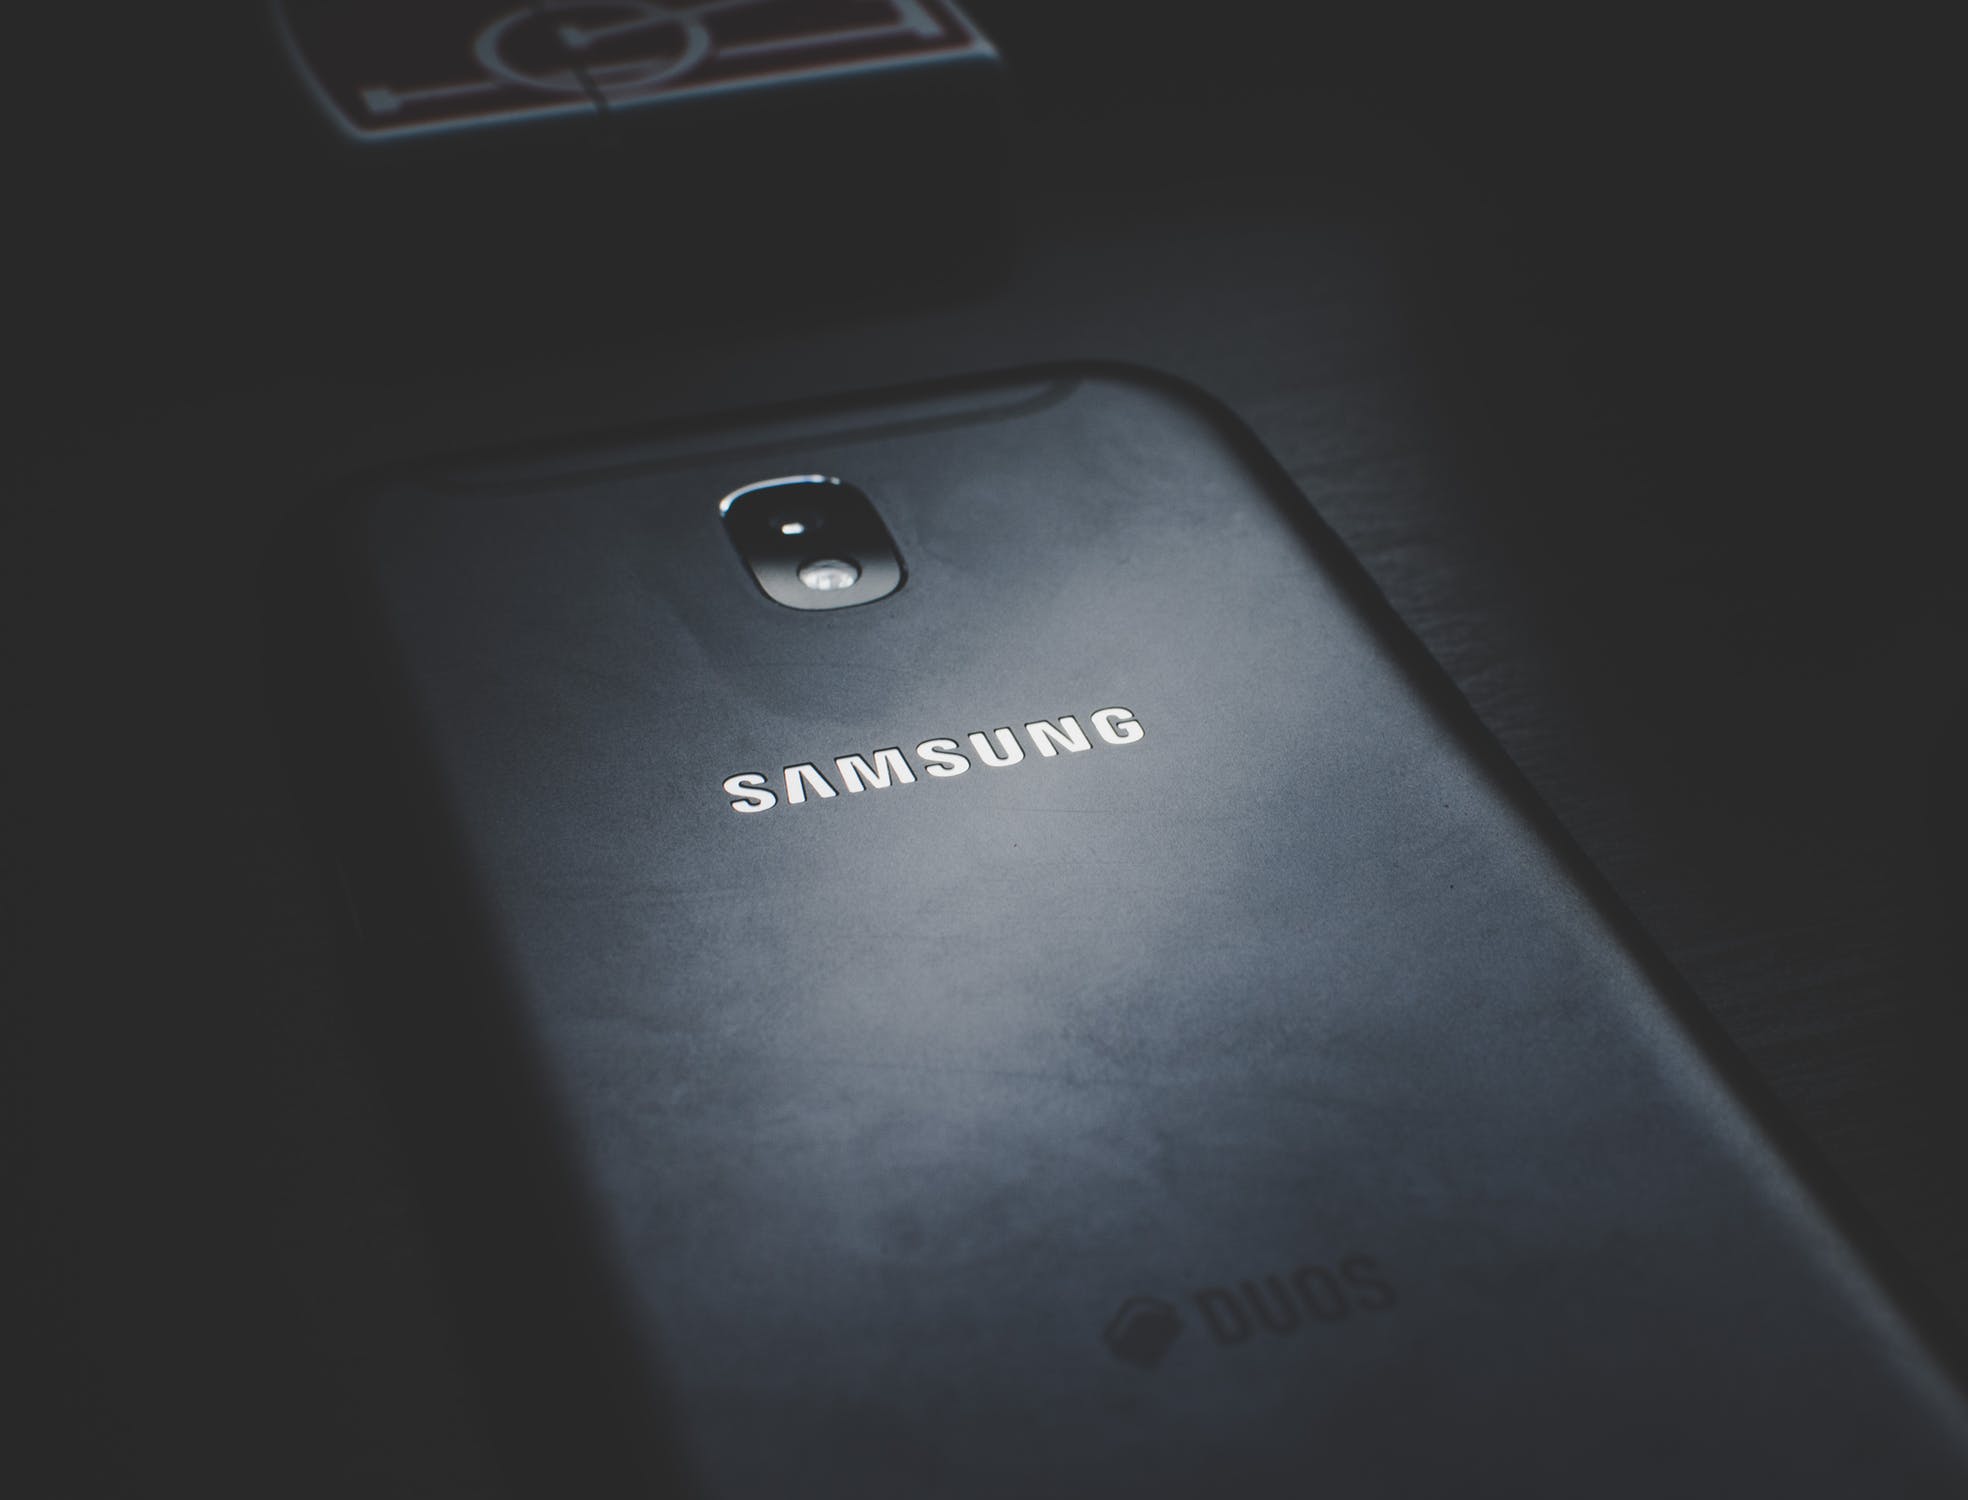 How To Recover Your Pin Or Password On The Samsung Galaxy J5